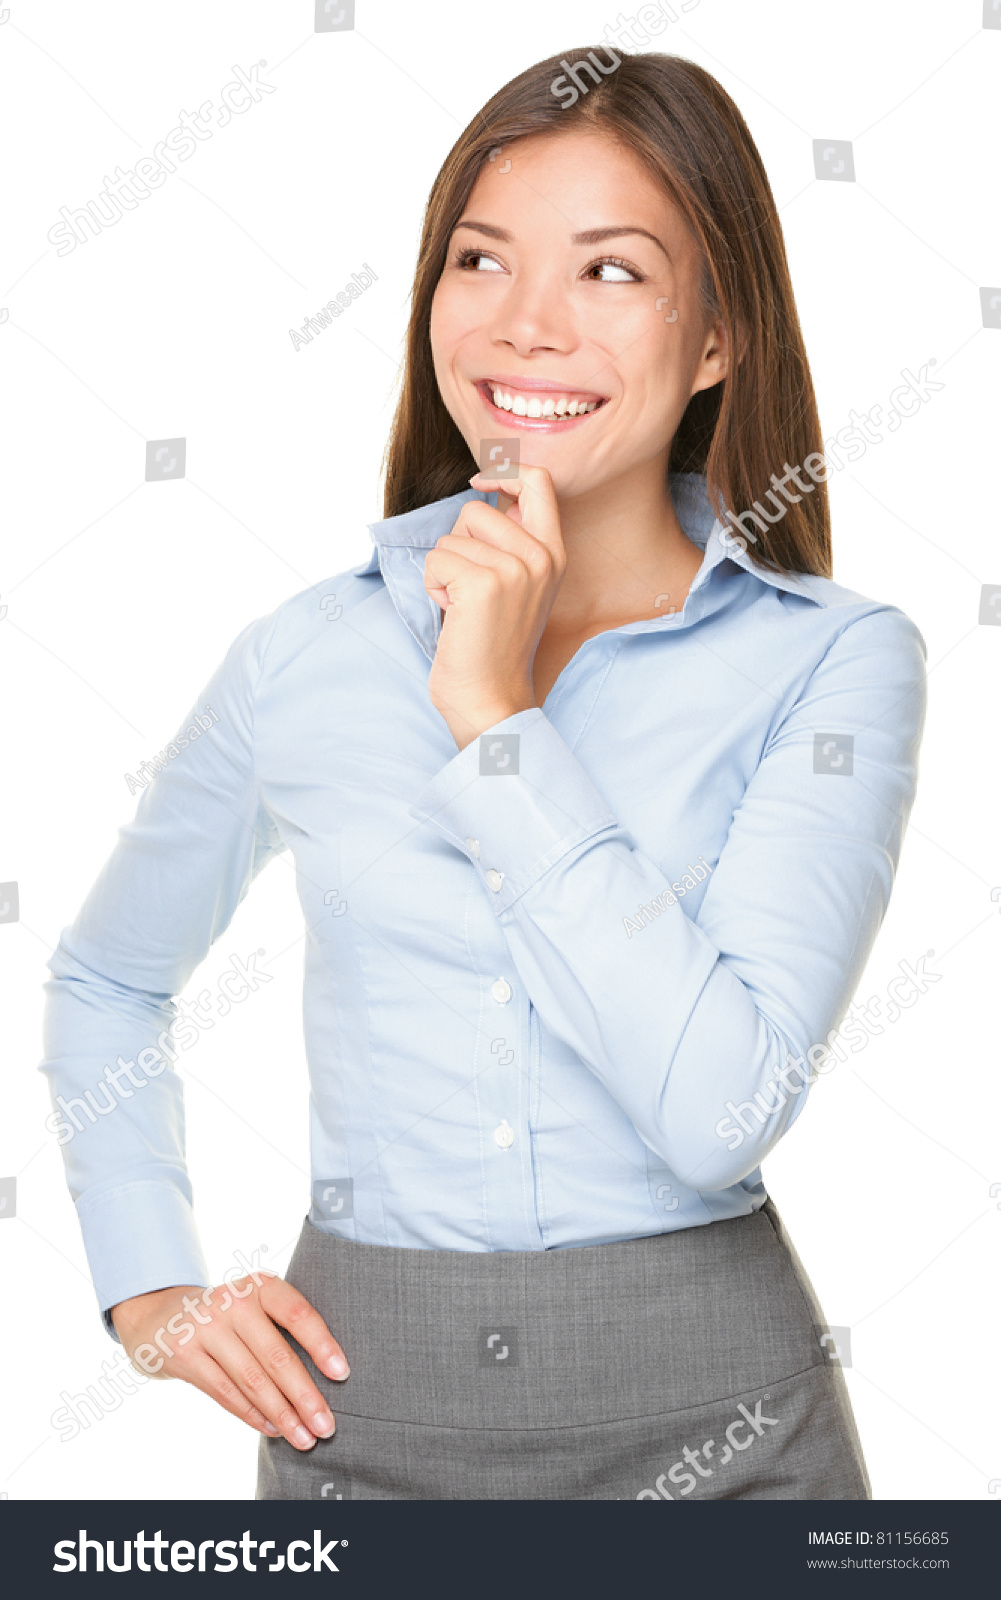 stock-photo-thinking-asian-business-woman-smiling-looking-to-the-side-beautiful-young-mixed-race-asian-81156685.jpg